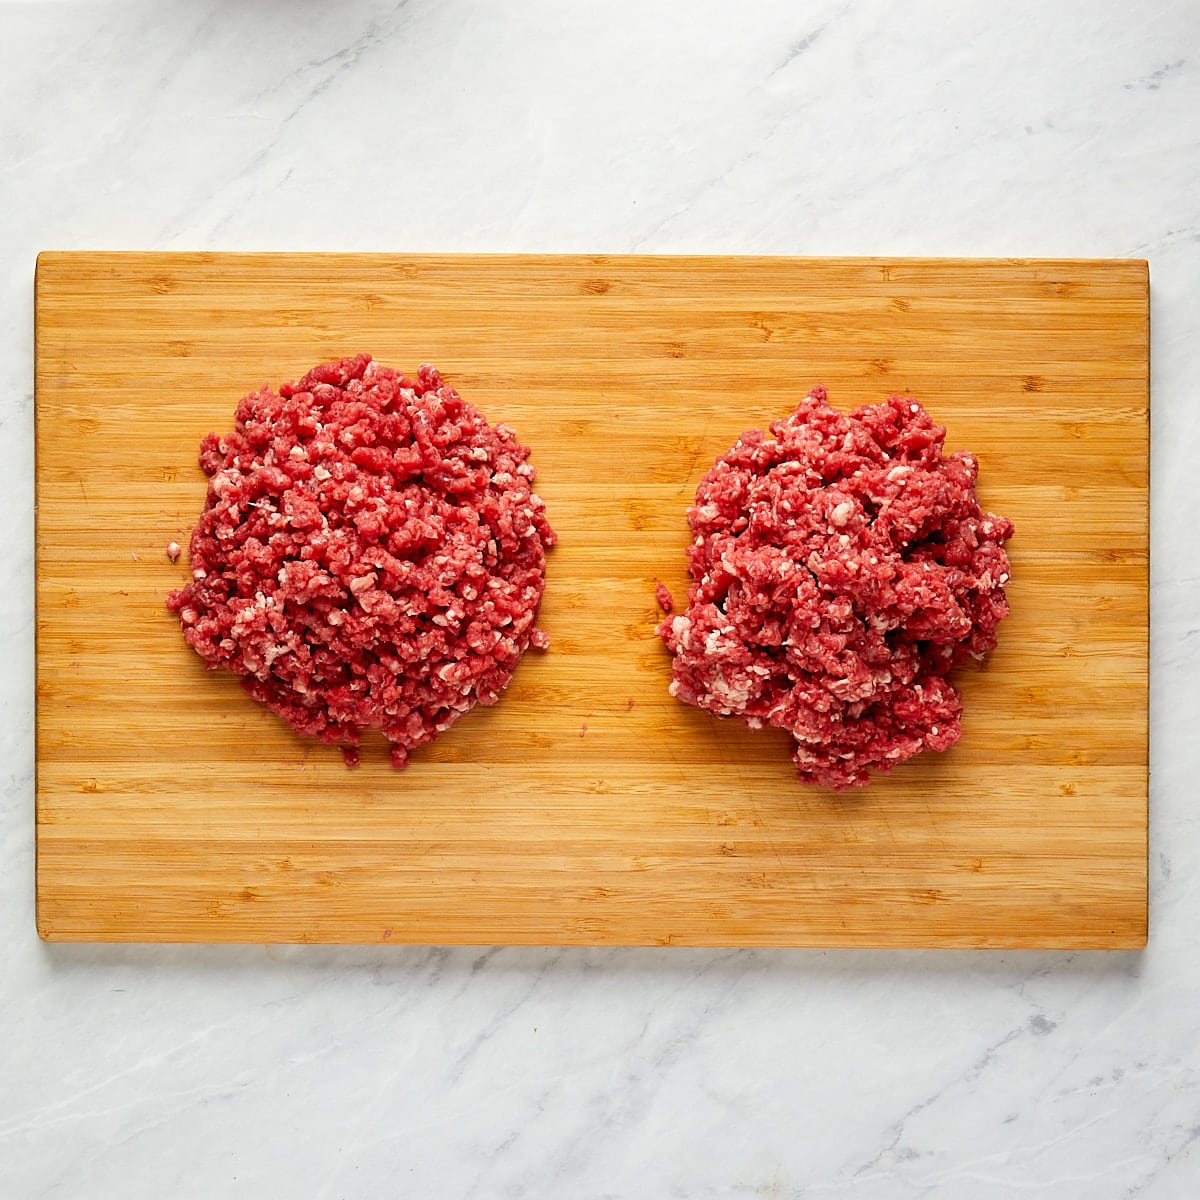 beef that has been ground with a kitchen-aid stand mixer with grinder attachment and beef that has been ground with food process sitting side by side on a wood cutting board.